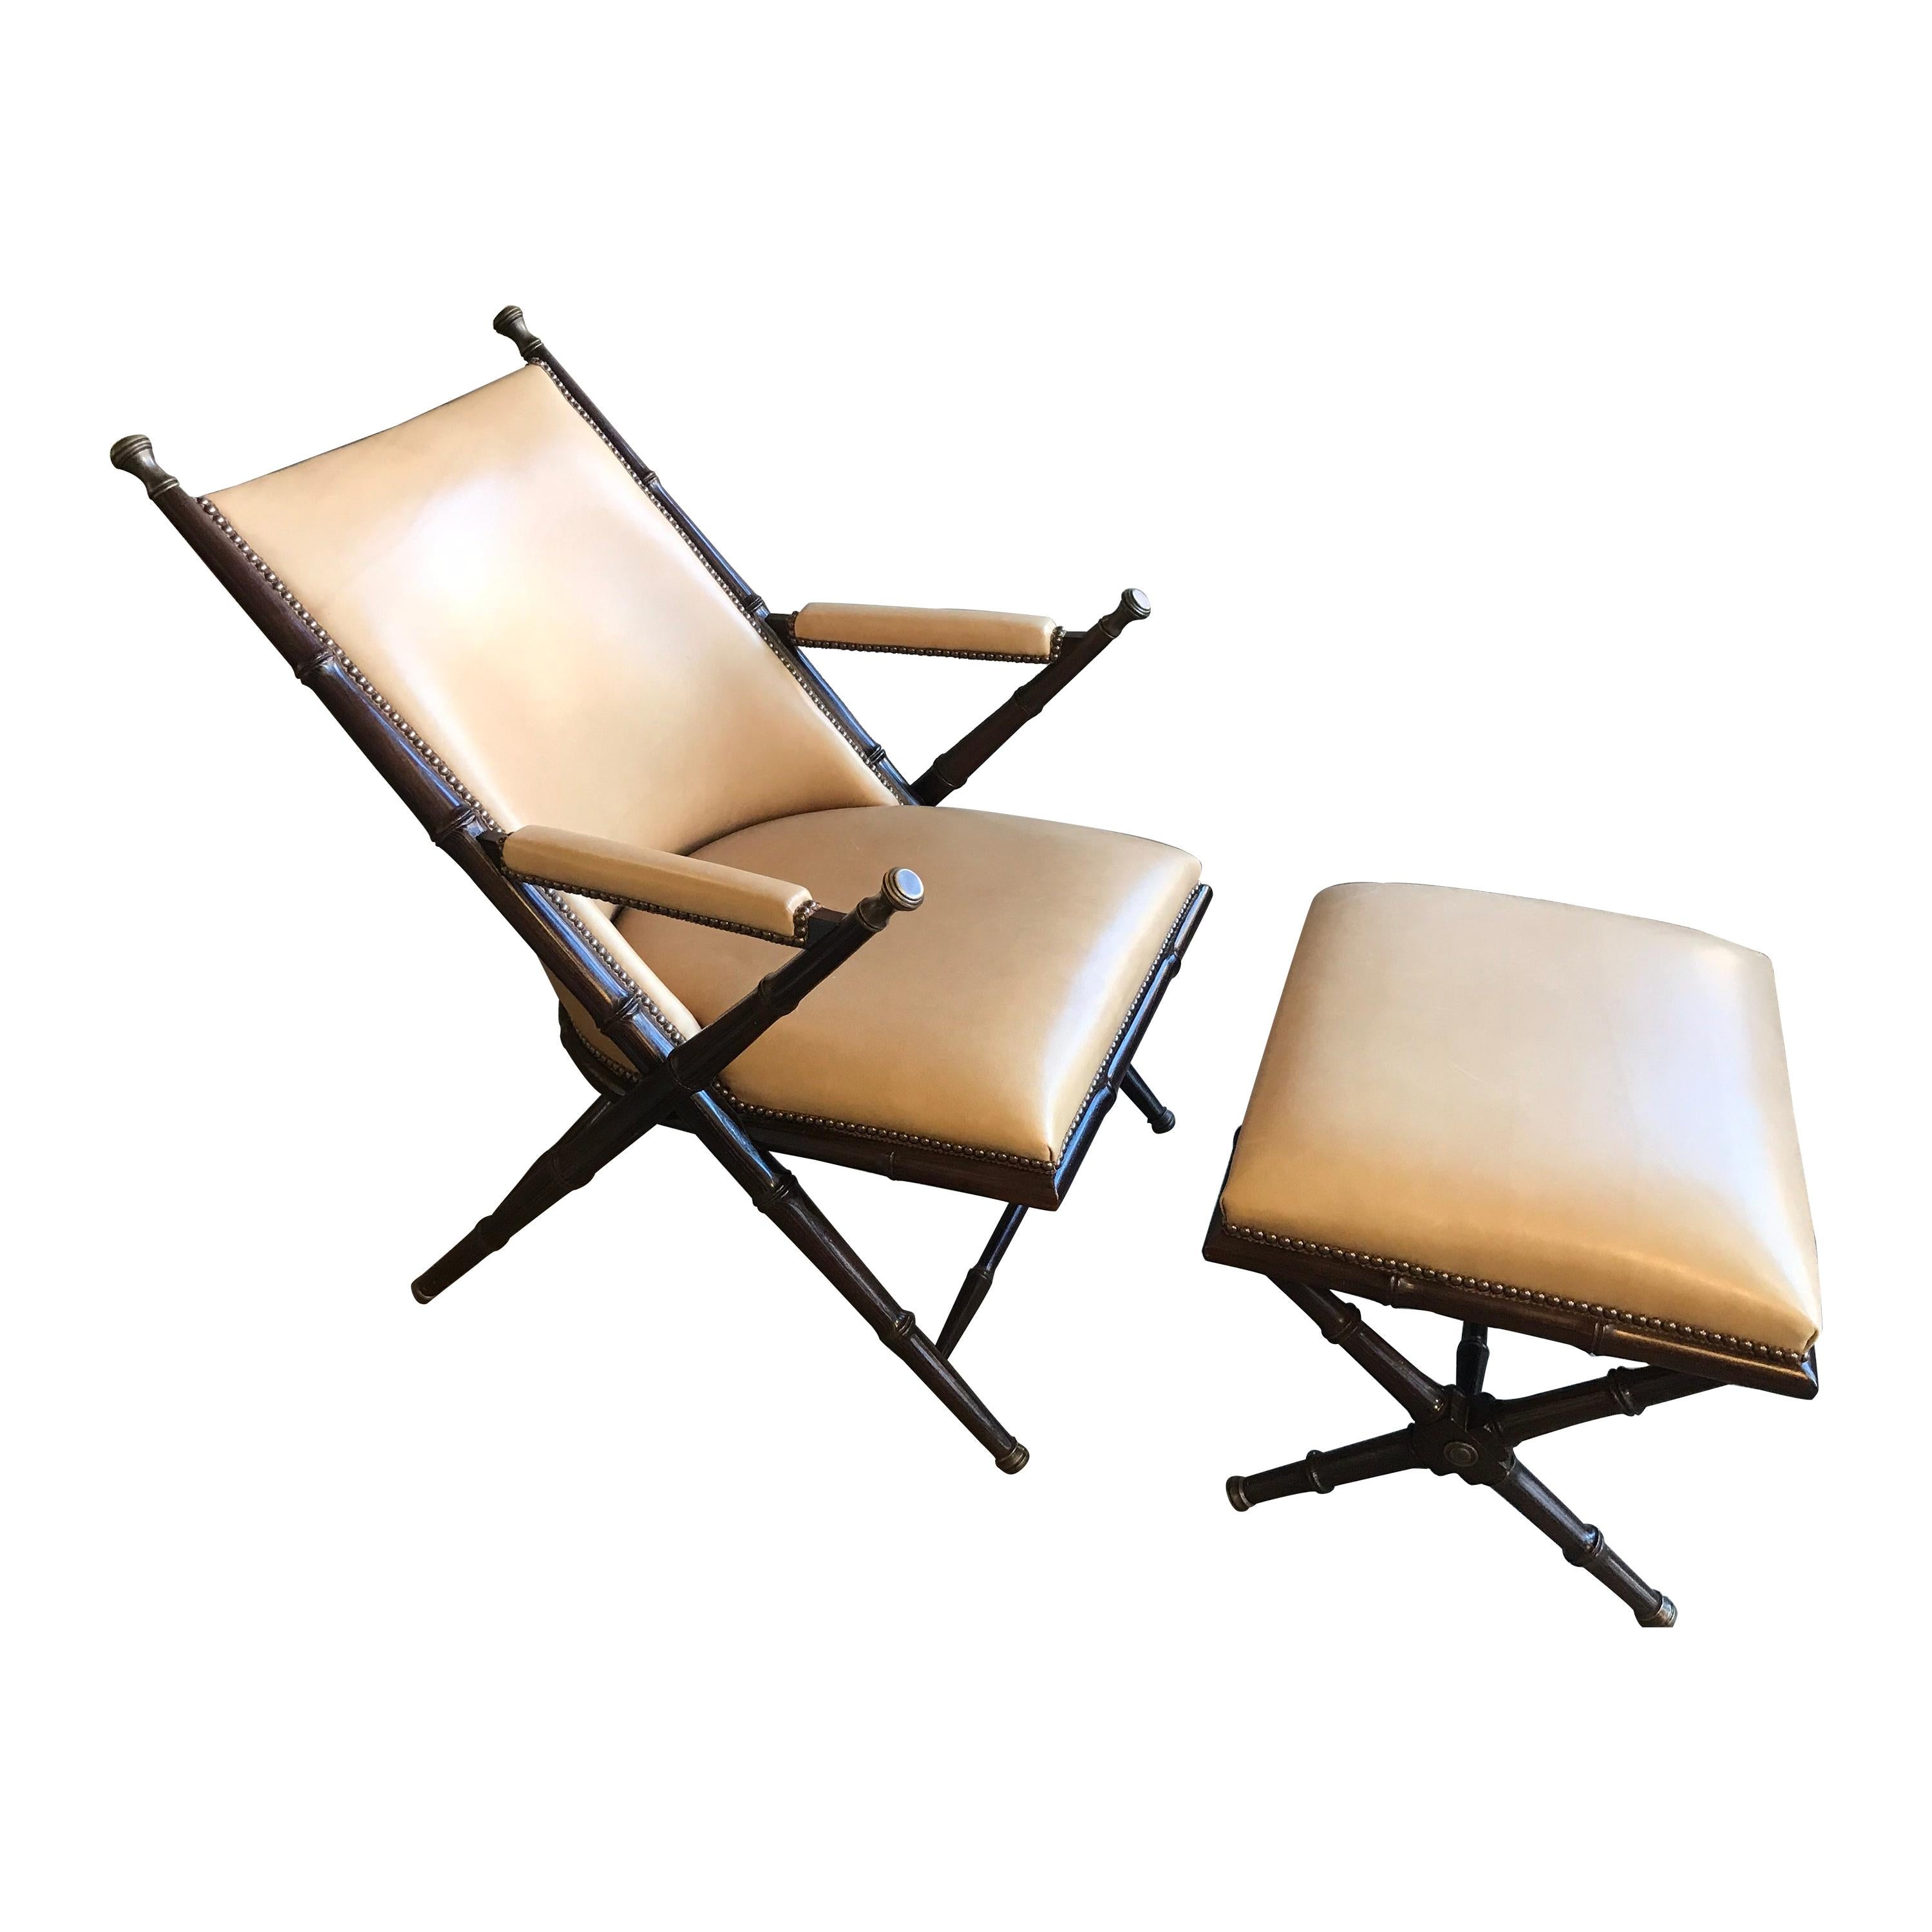 Bamboo, Brass and Leather Lounge Chair and Ottoman by Hickory Chair Co.